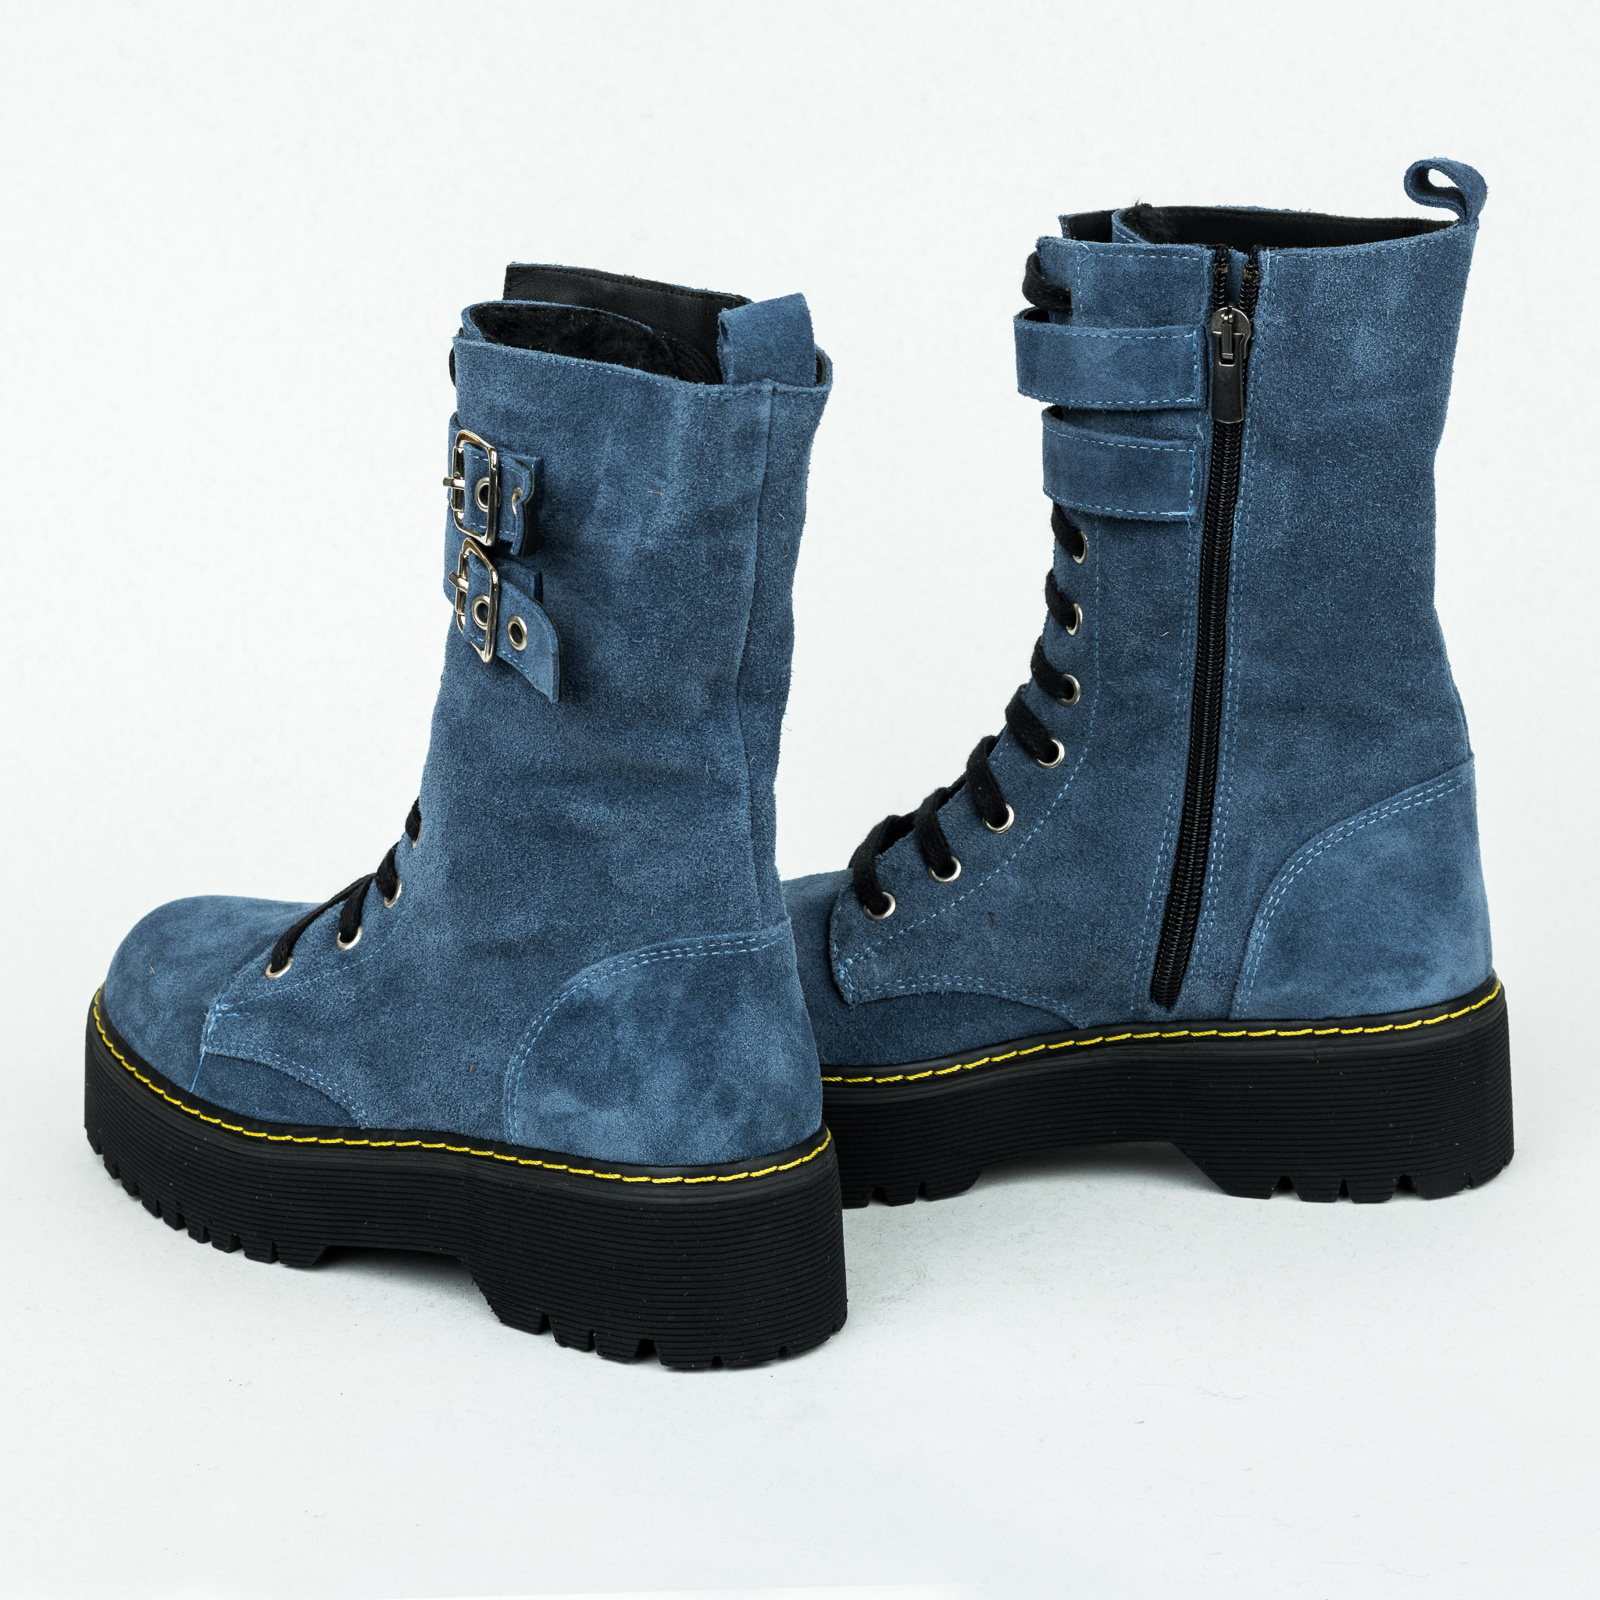 Leather WATERPROOF boots B203 - BLUE